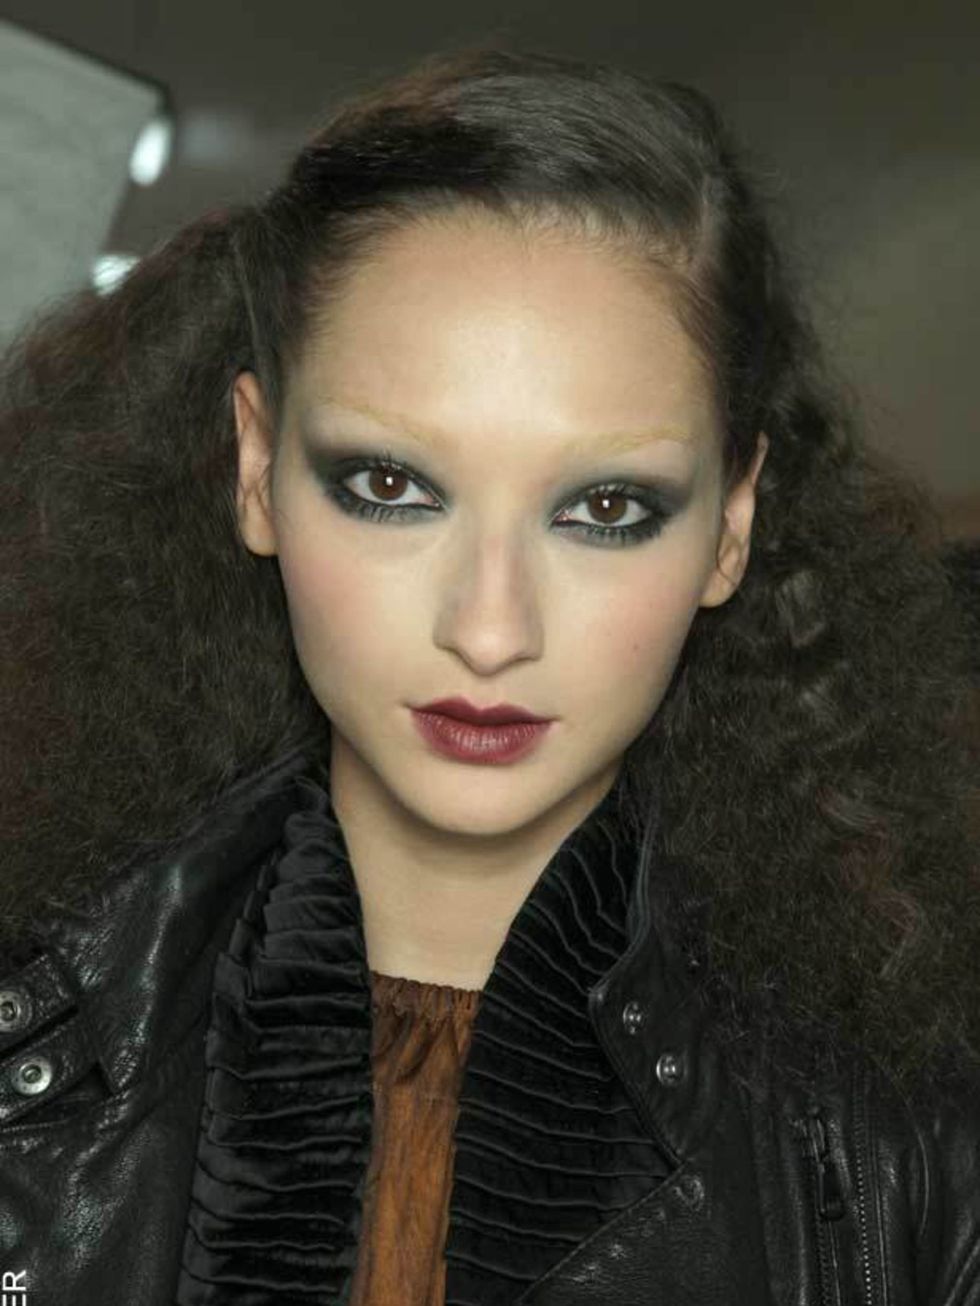 <p><a href="http://www.elleuk.com/catwalk/collections/marc-jacobs/">Click here to see the Marc Jacobs s/s '11 show...</a></p>